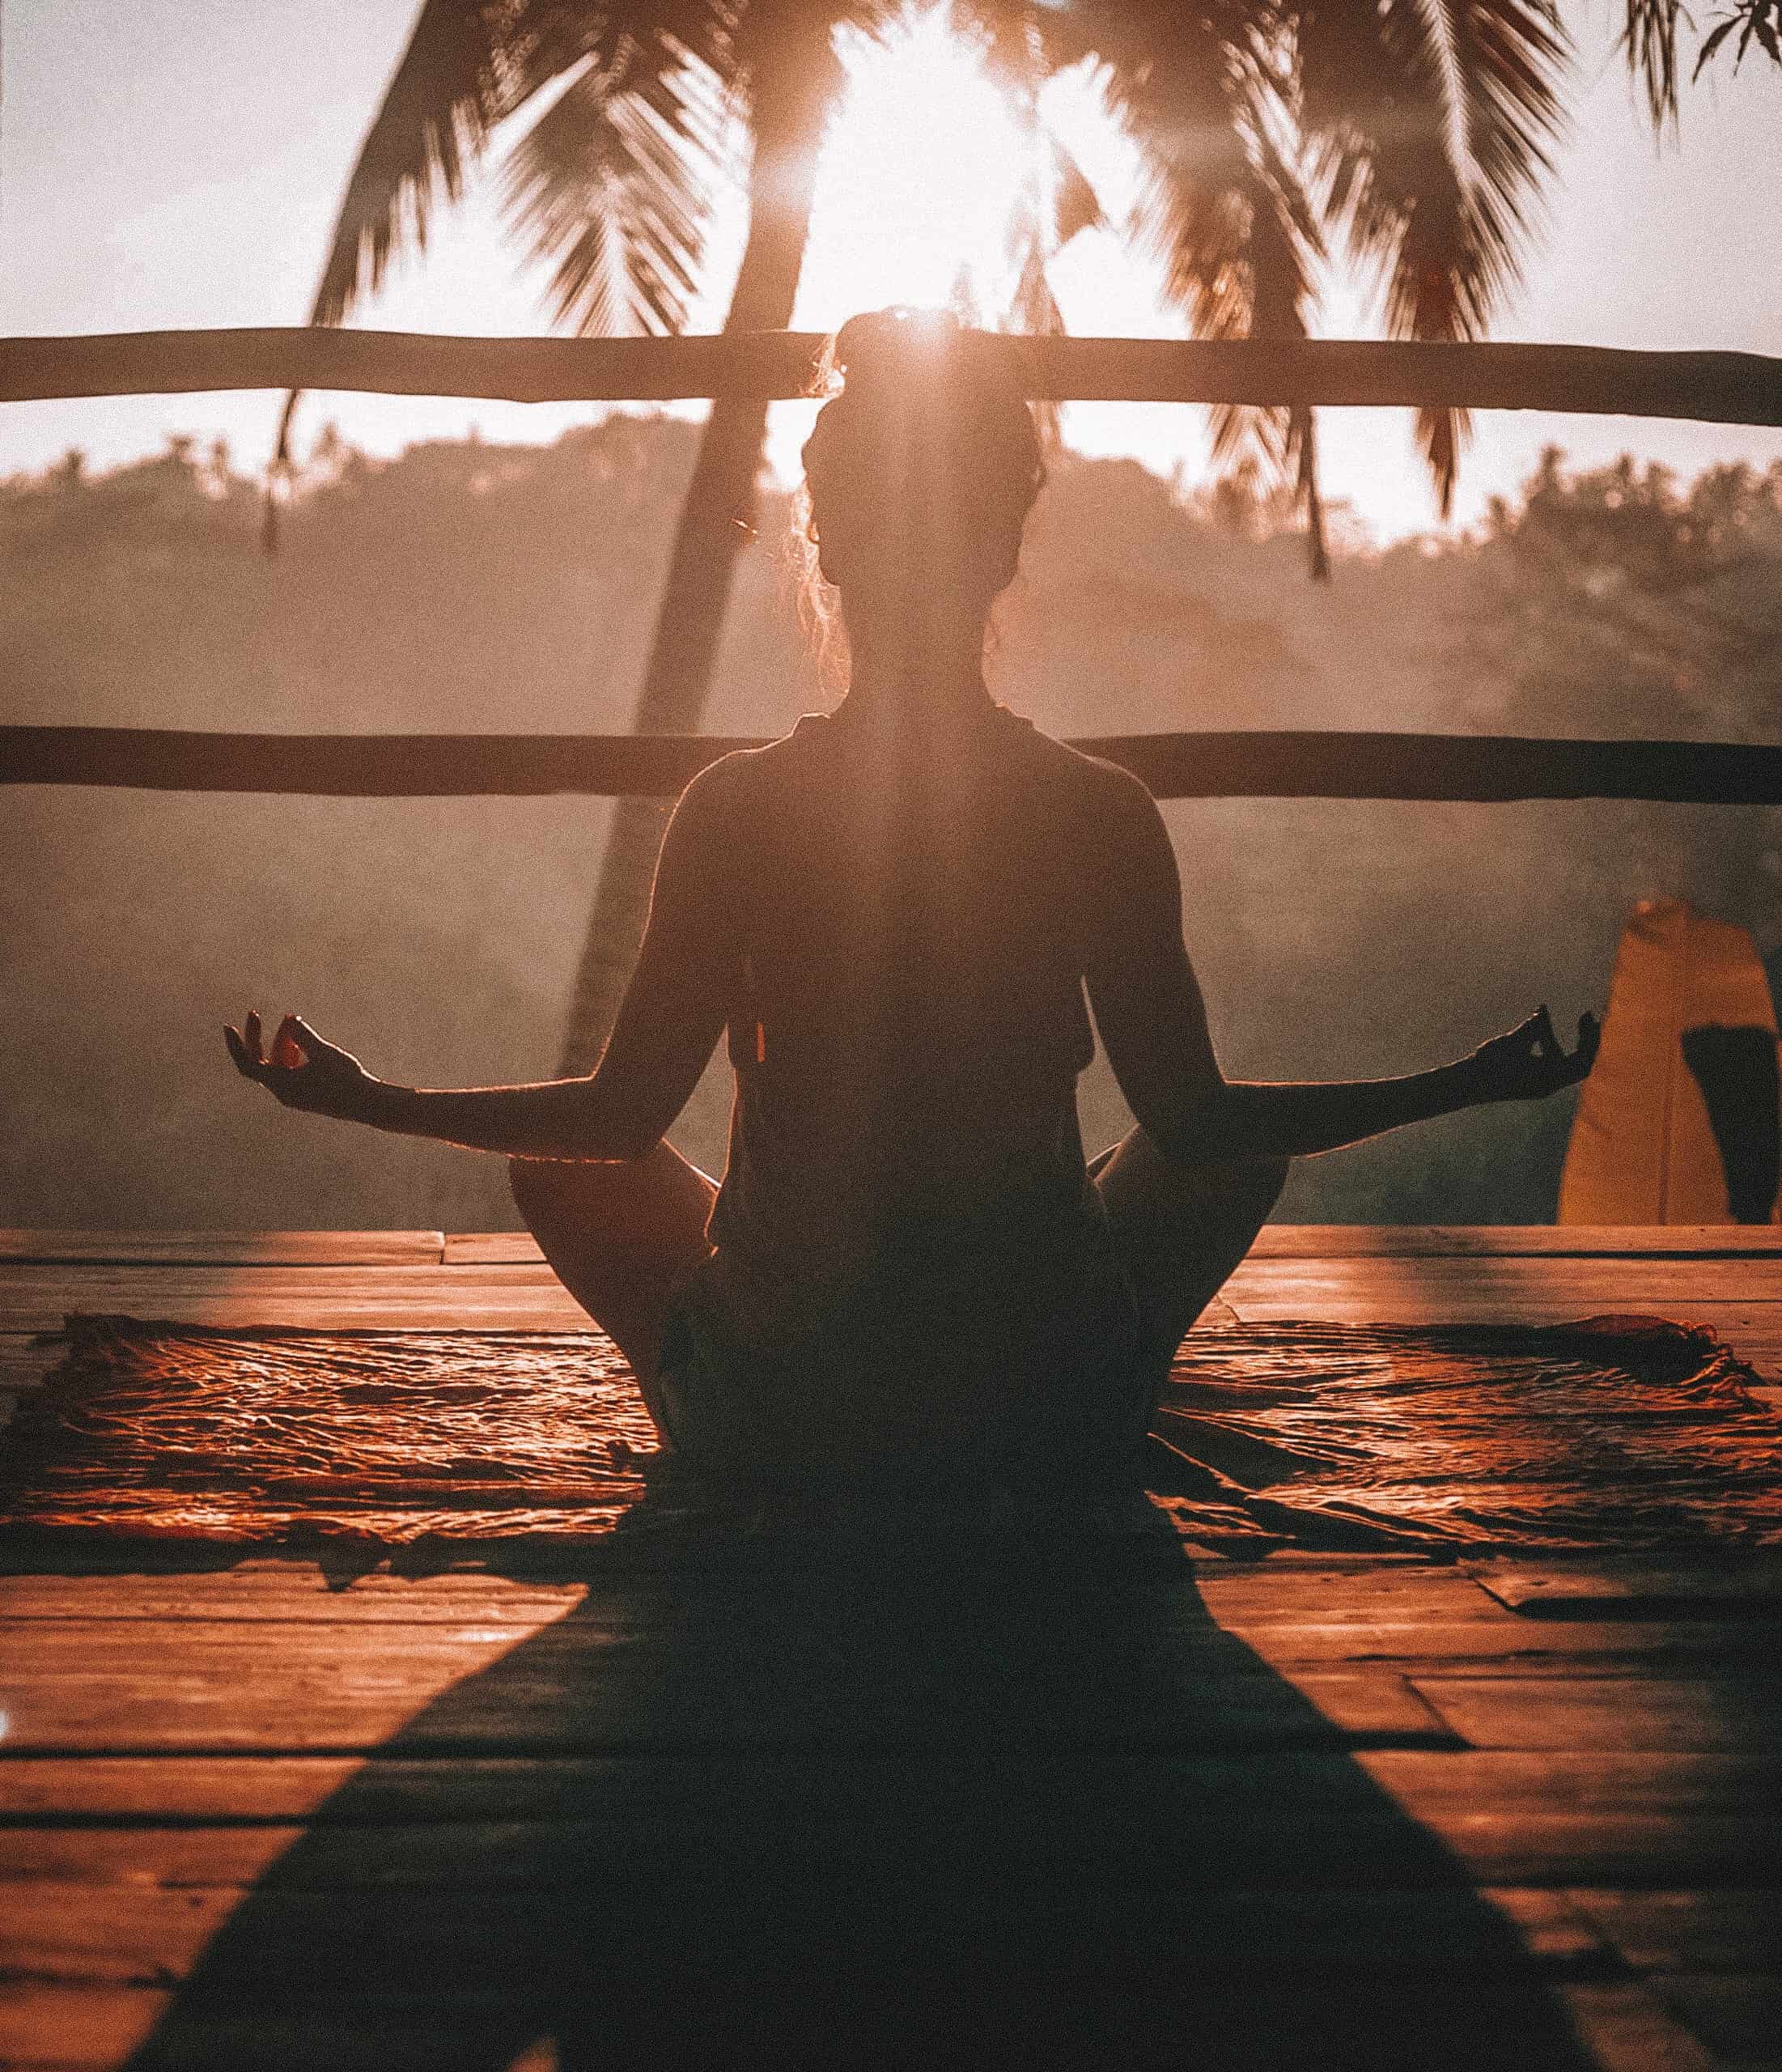 Silhouette of a woman meditating on a wooden platform with her back to the camera and the sunset sunshine in the background